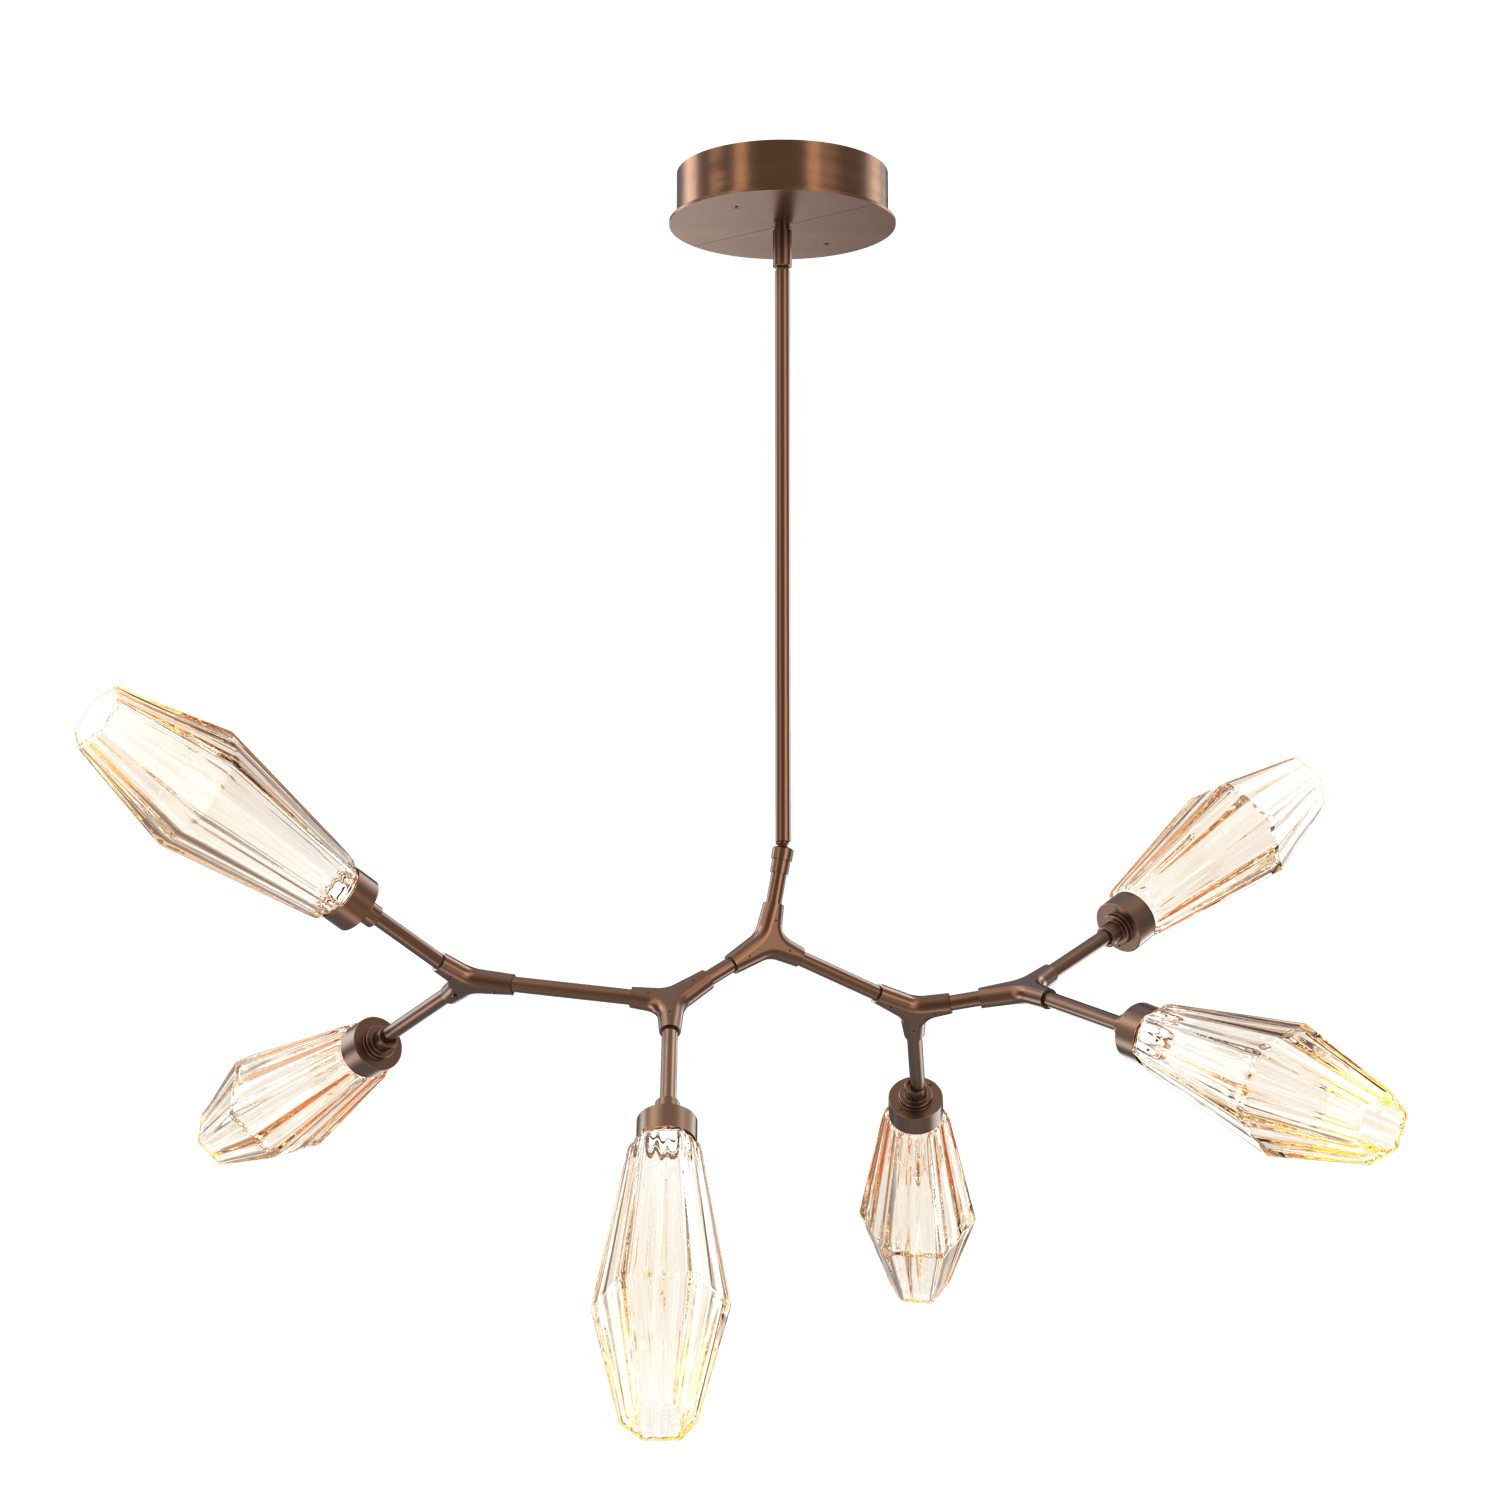 PLB0049-BA-RB-RA-Hammerton-Studio-Aalto-6-light-modern-branch-chandelier-with-oil-rubbed-bronze-finish-and-optic-ribbed-amber-glass-shades-and-LED-lamping